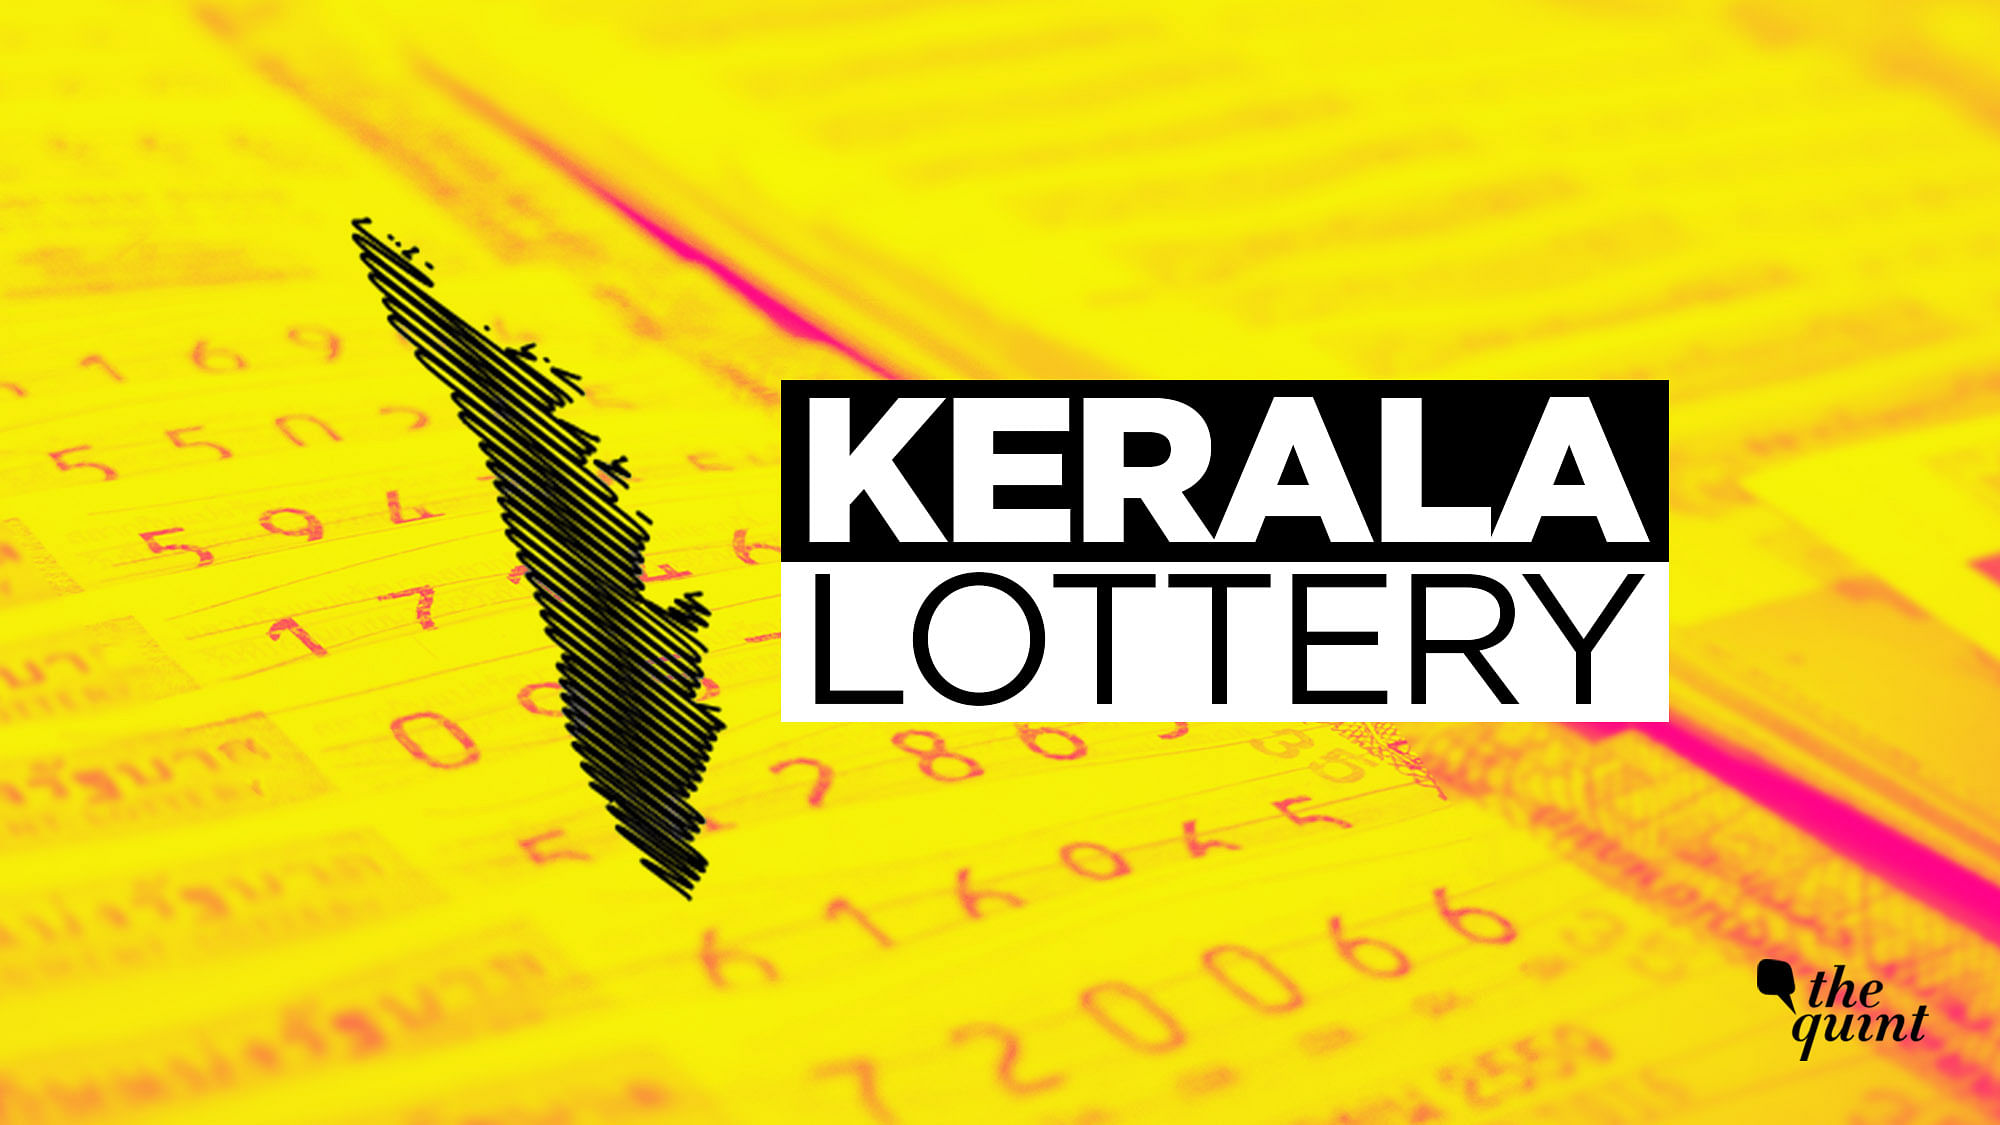 Kerala Lottery Result 2019: Kerala Pournami RN-392 lottery result were declared today at Kerala state lottery department official website&nbsp;